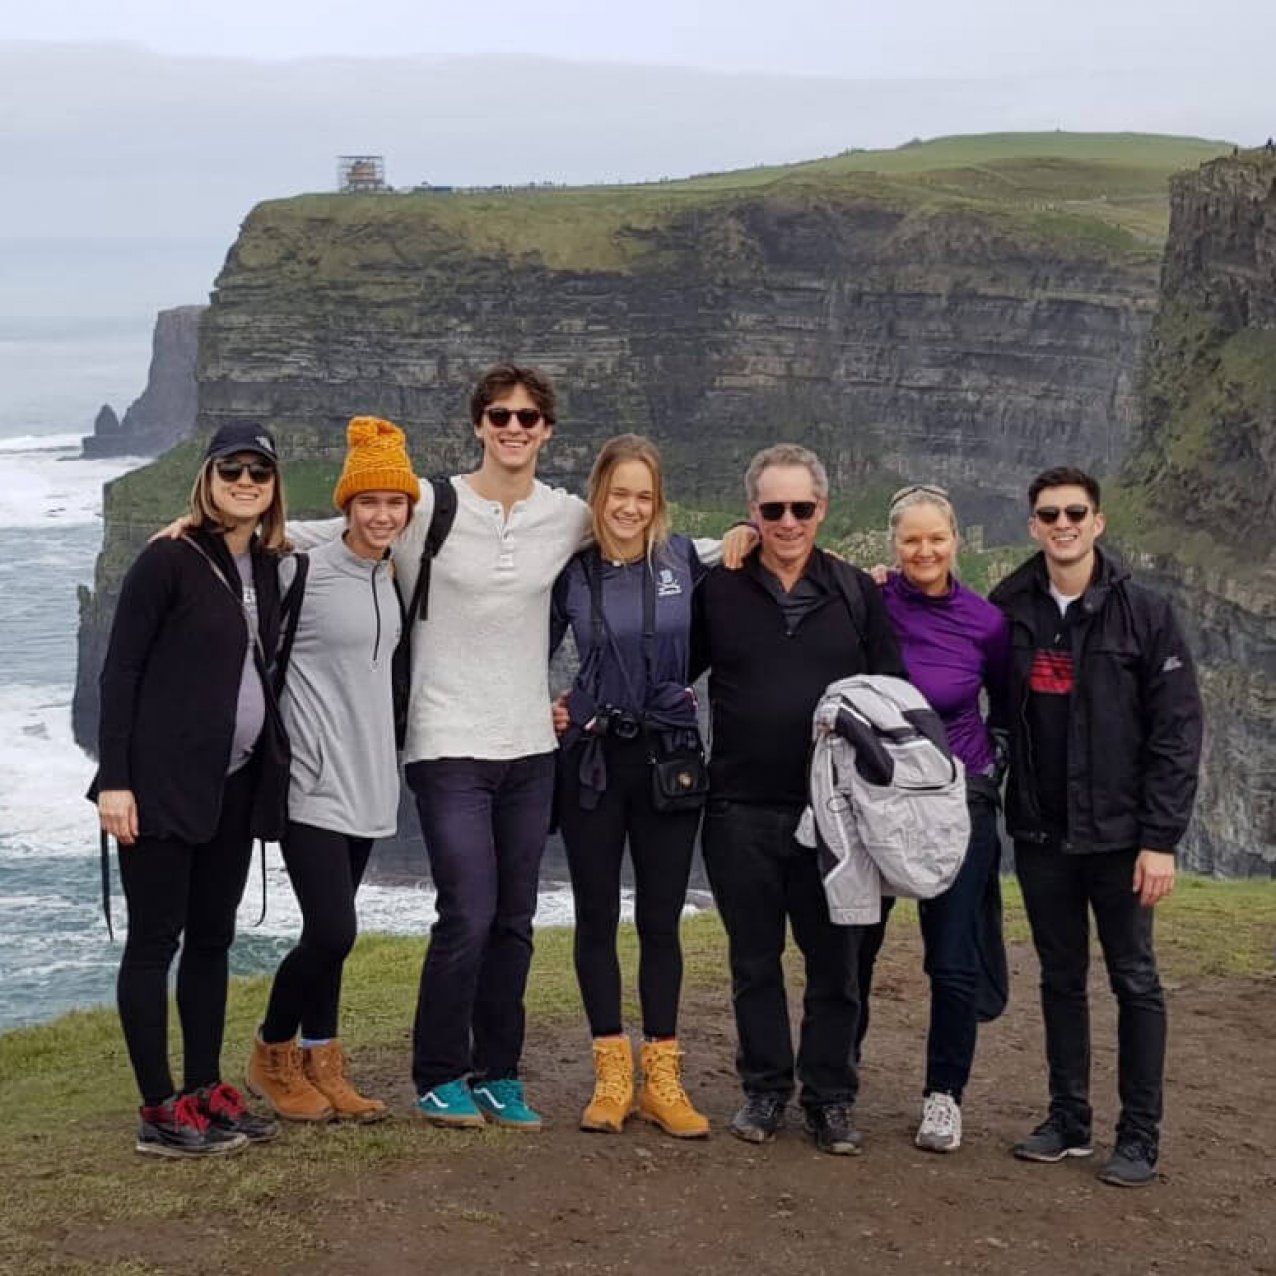 Family group posing at the Cliffs of Moher